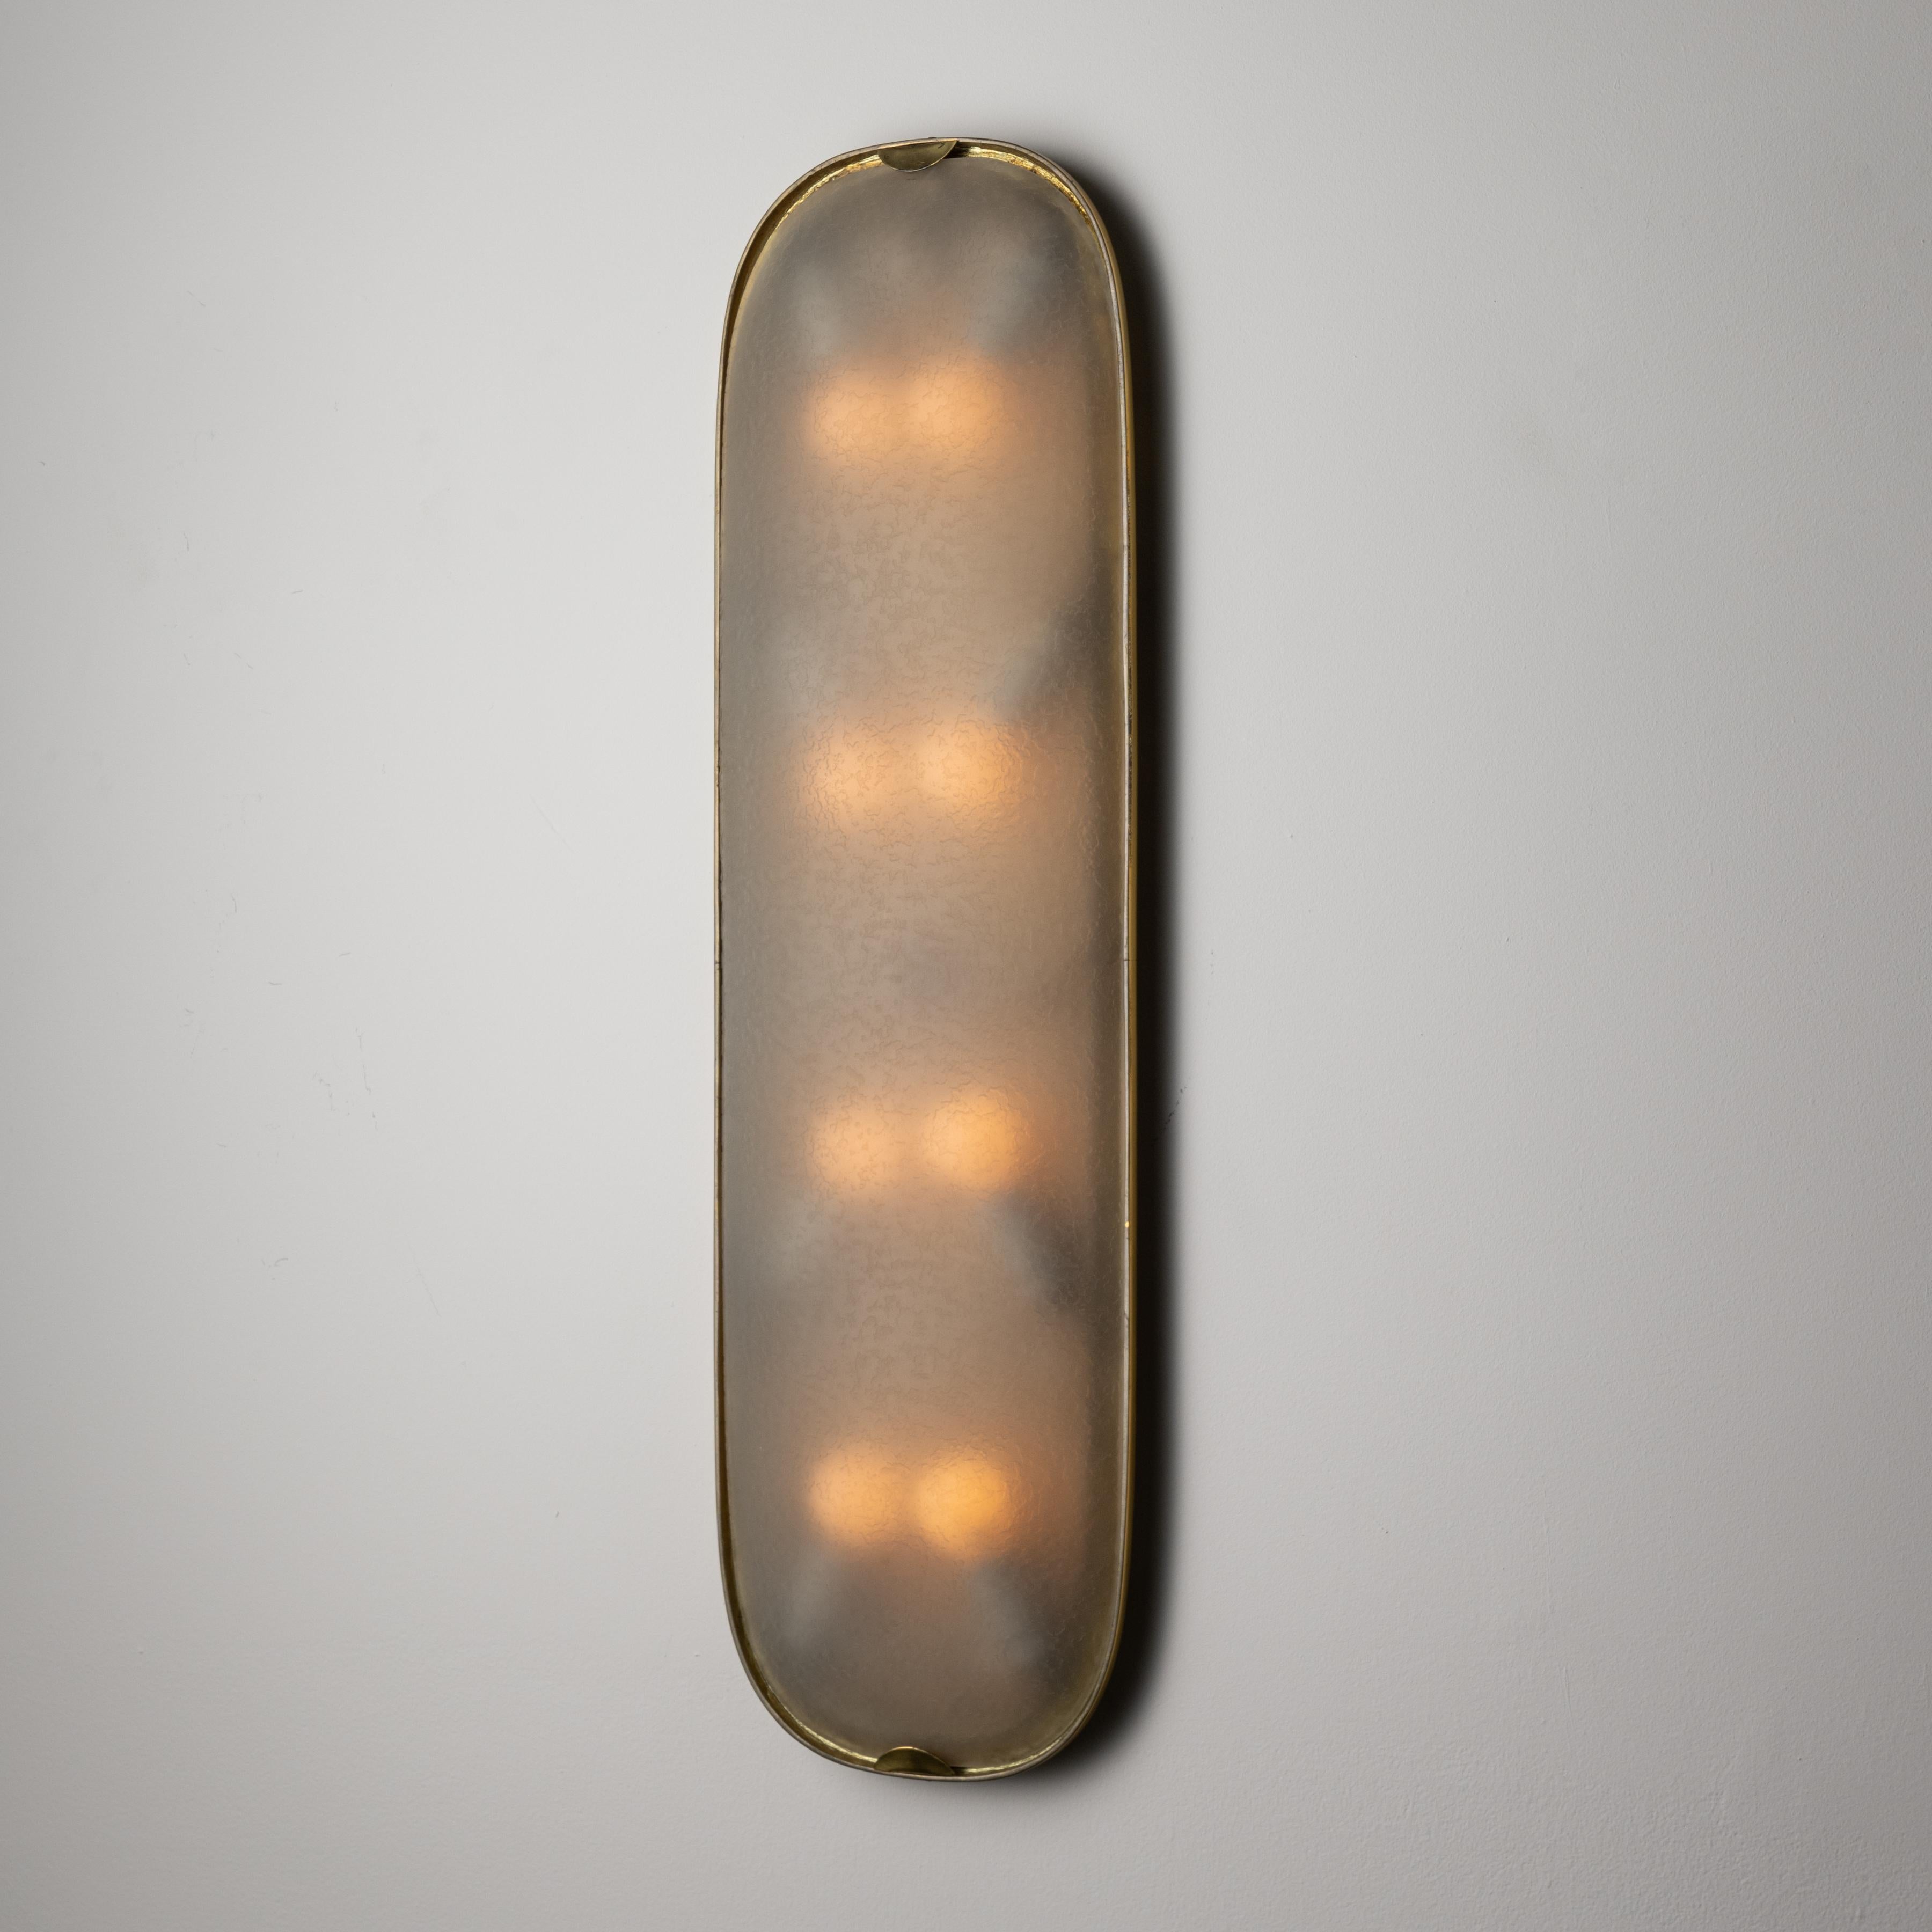 Large and rare wall/ceiling light by Fontana Arte. Designed and manufactured in Italy, circa 1950. Elegant flush mount with textured glass diffuser and a minimal brass frame. The flush mount holds eight E14 bulb sockets, adapted for the US. We